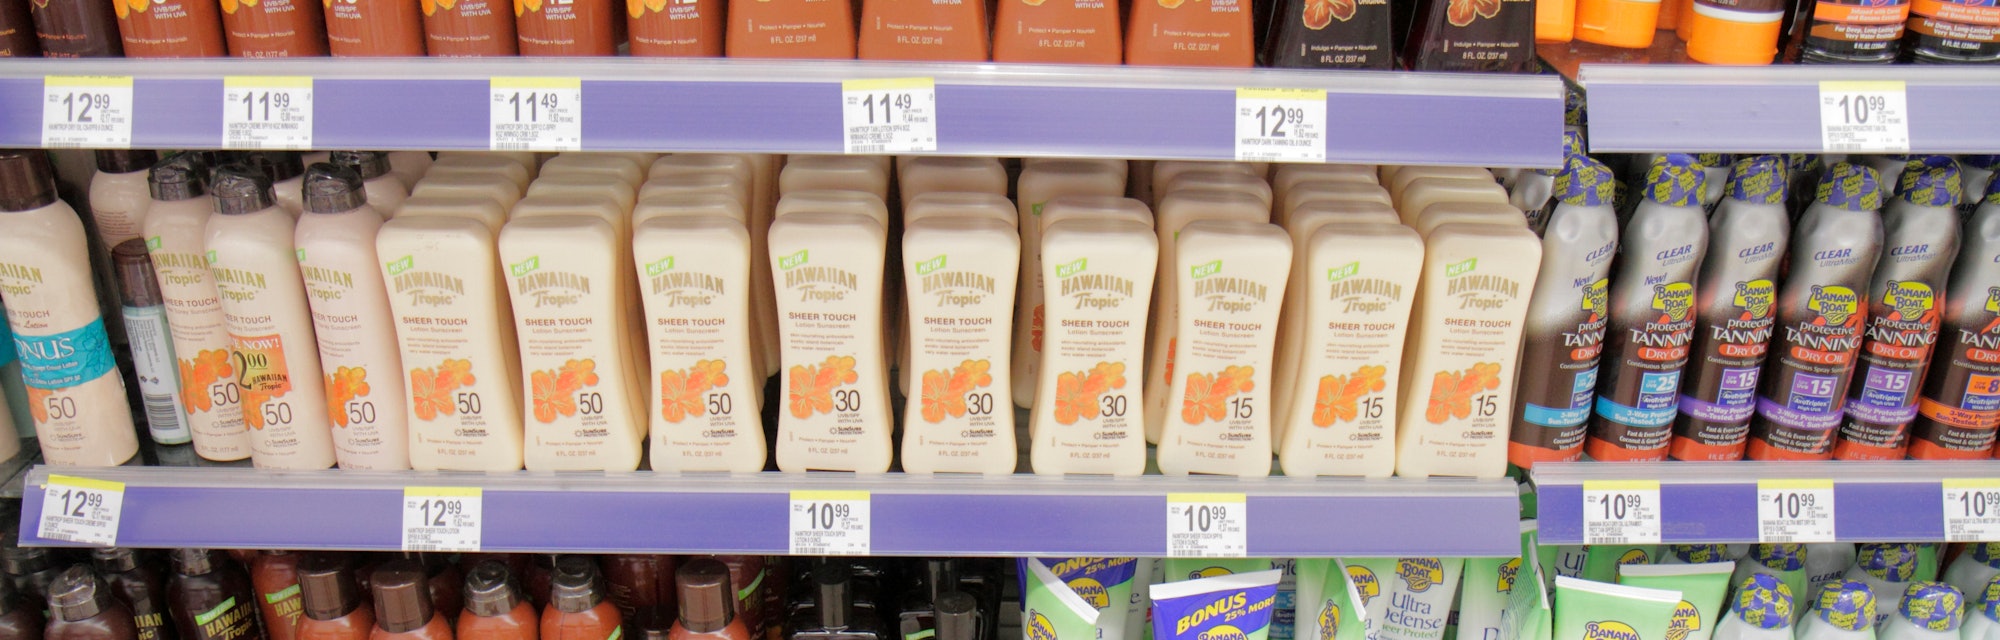 Sunscreens for sale at a Walgreens drug store.